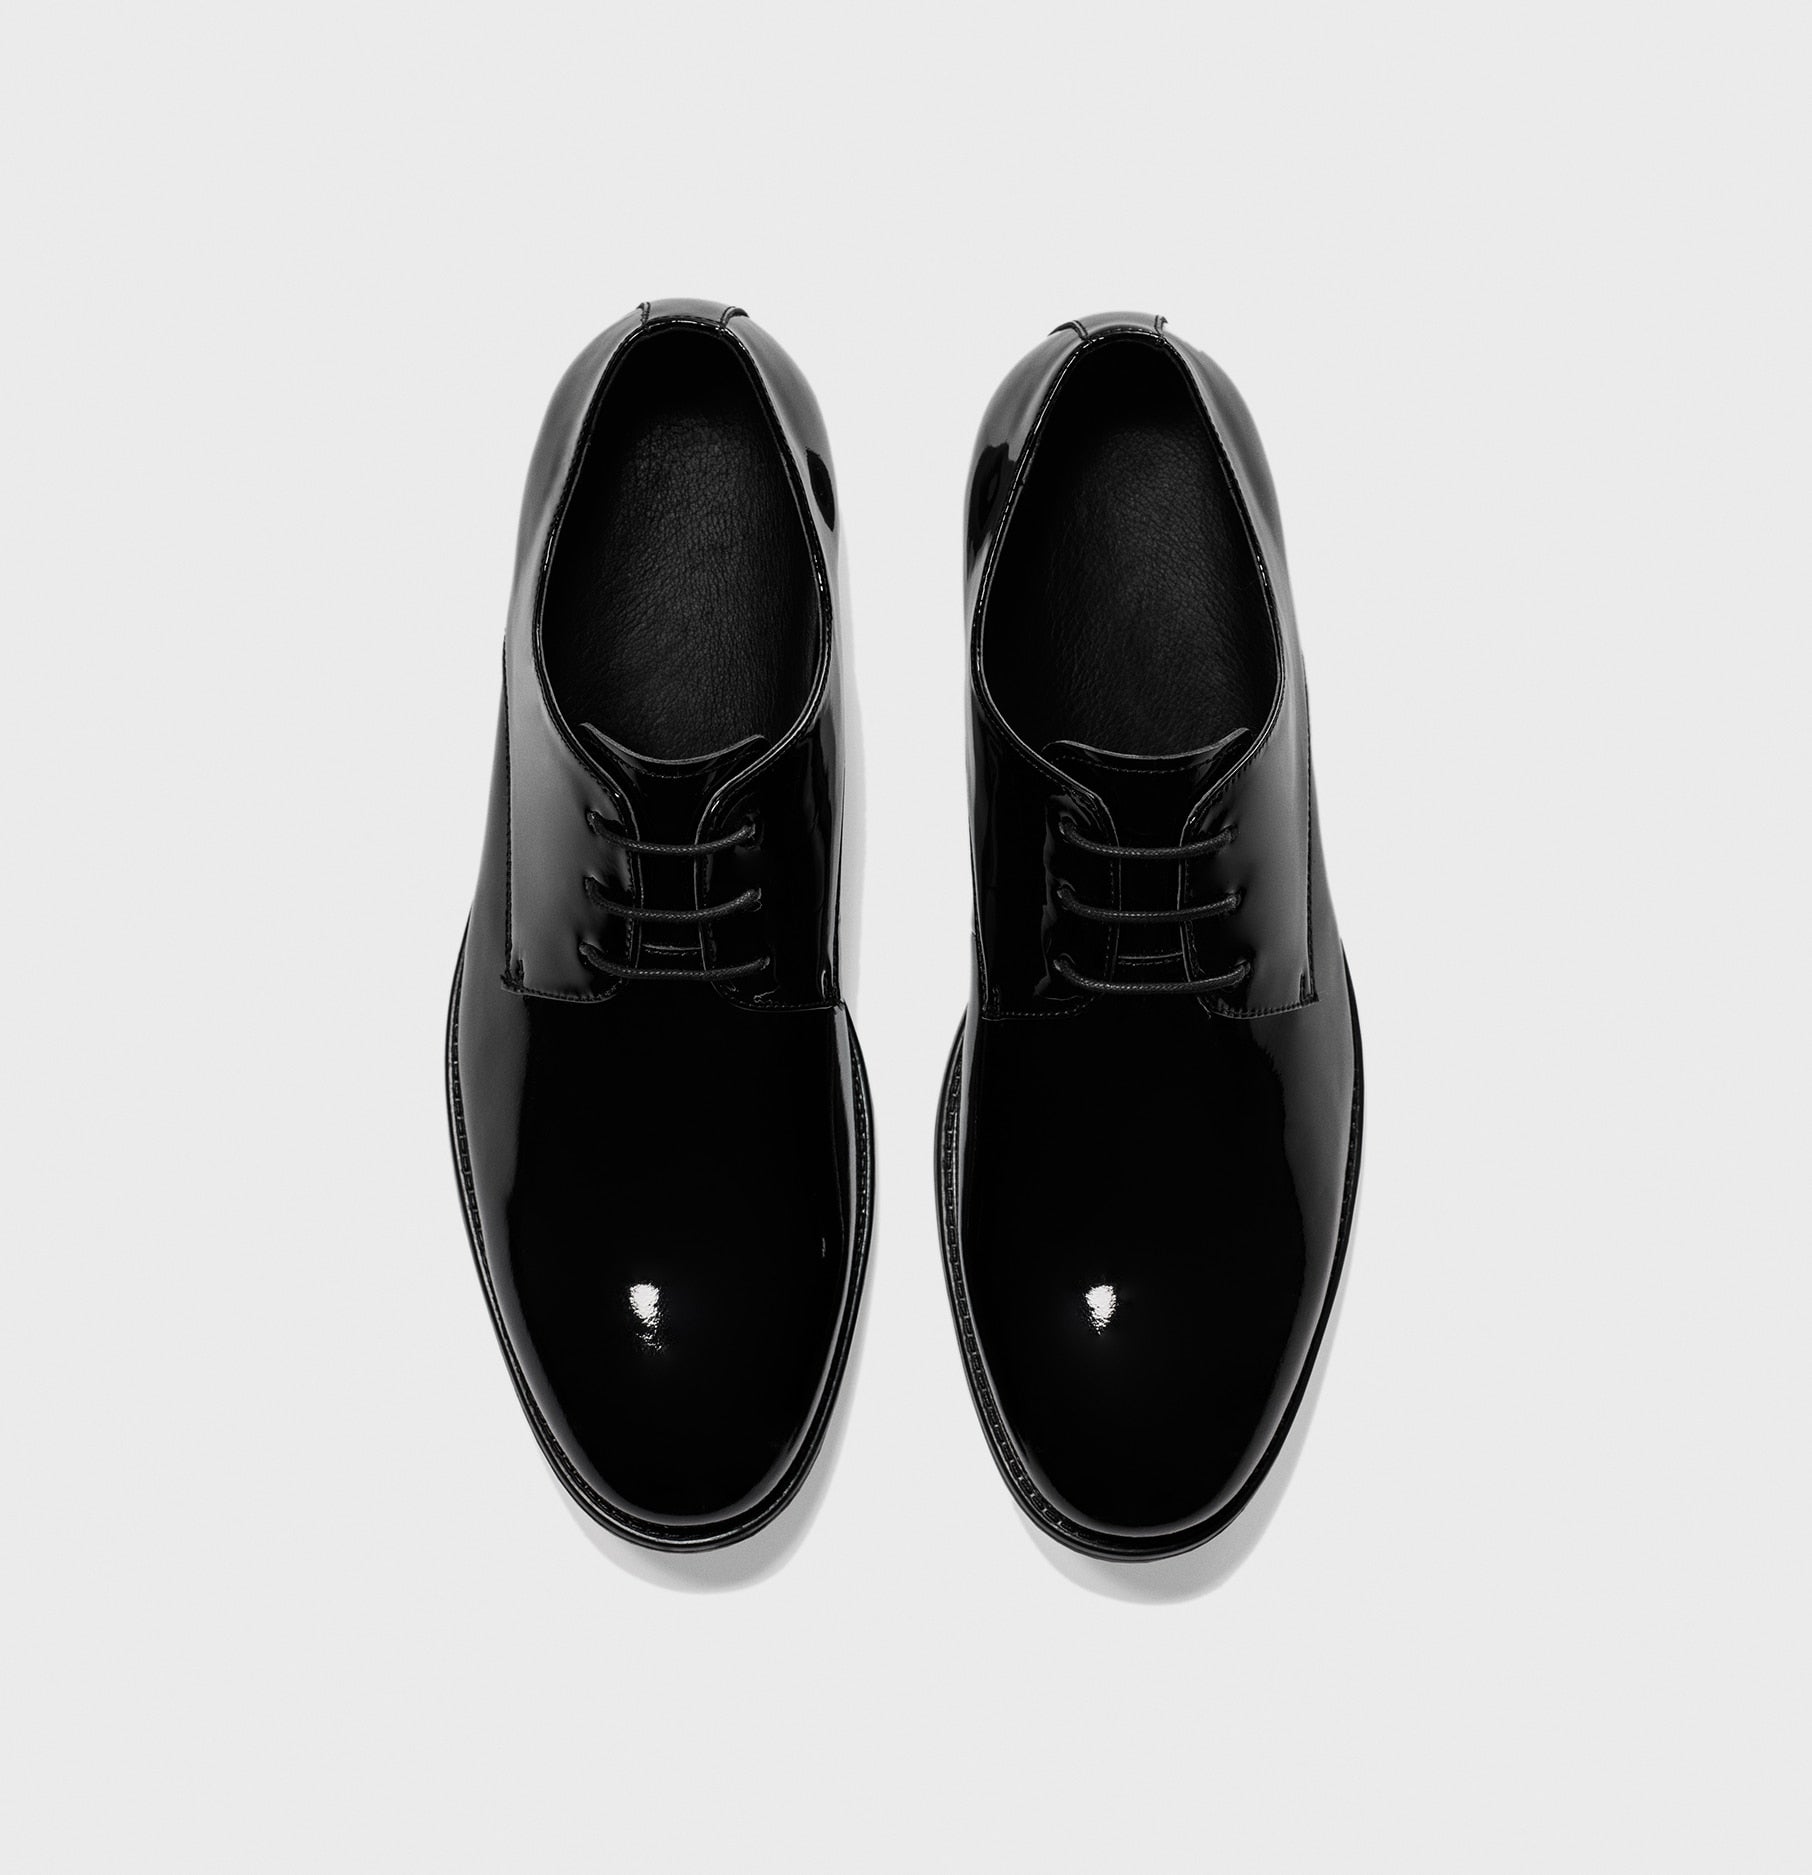 Men's Shoes Black Patent Leather Pointed Toe Business Formal Dress Suit  Oxfords | eBay